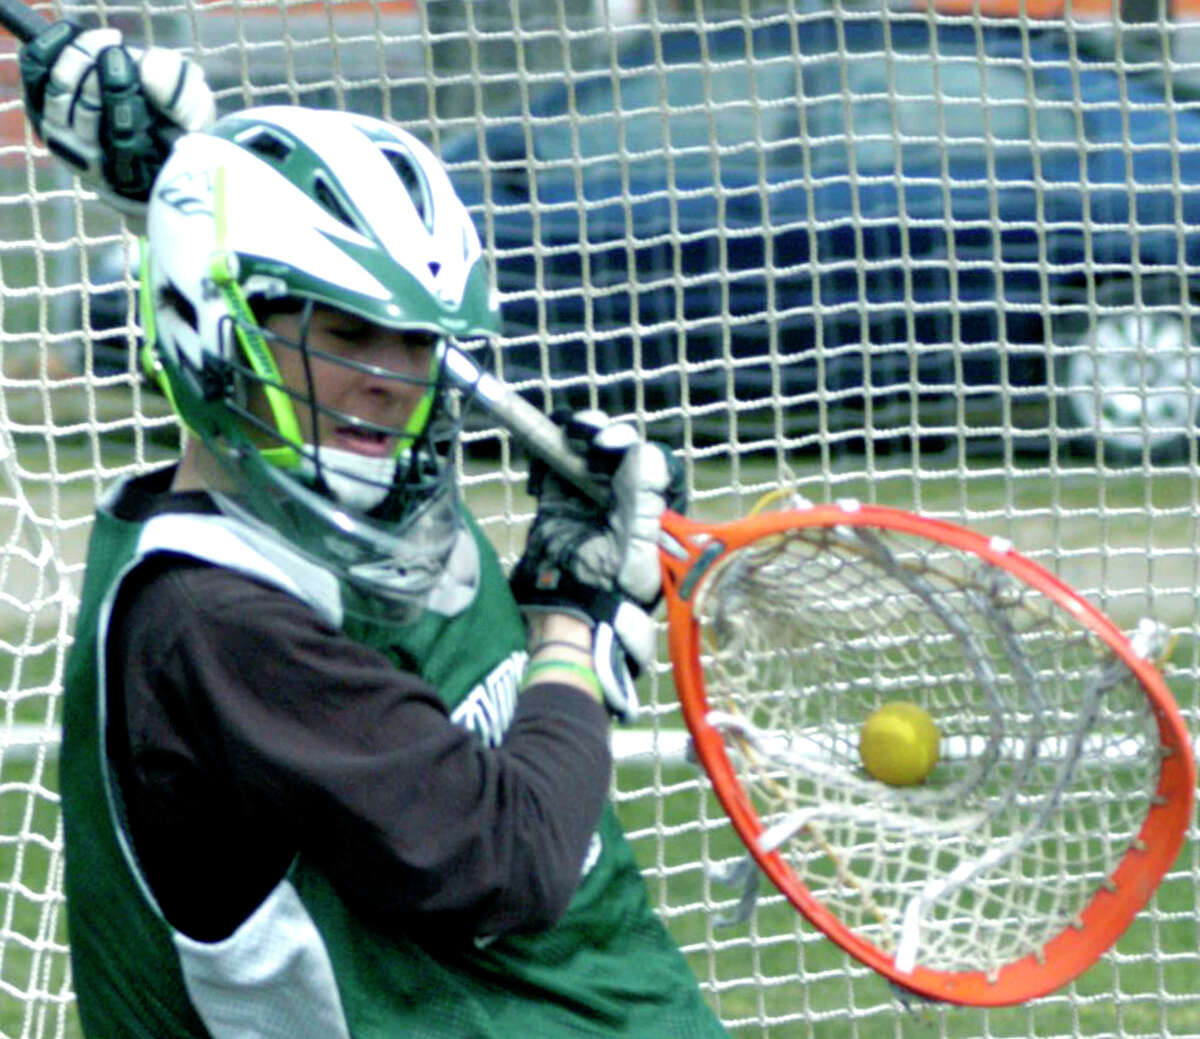 SPECTRUM/The quick hands of Green Wave goaltender Matt Lalli secure a save during pre-season practice for New Milford High School boys' lacrosse. April 2012